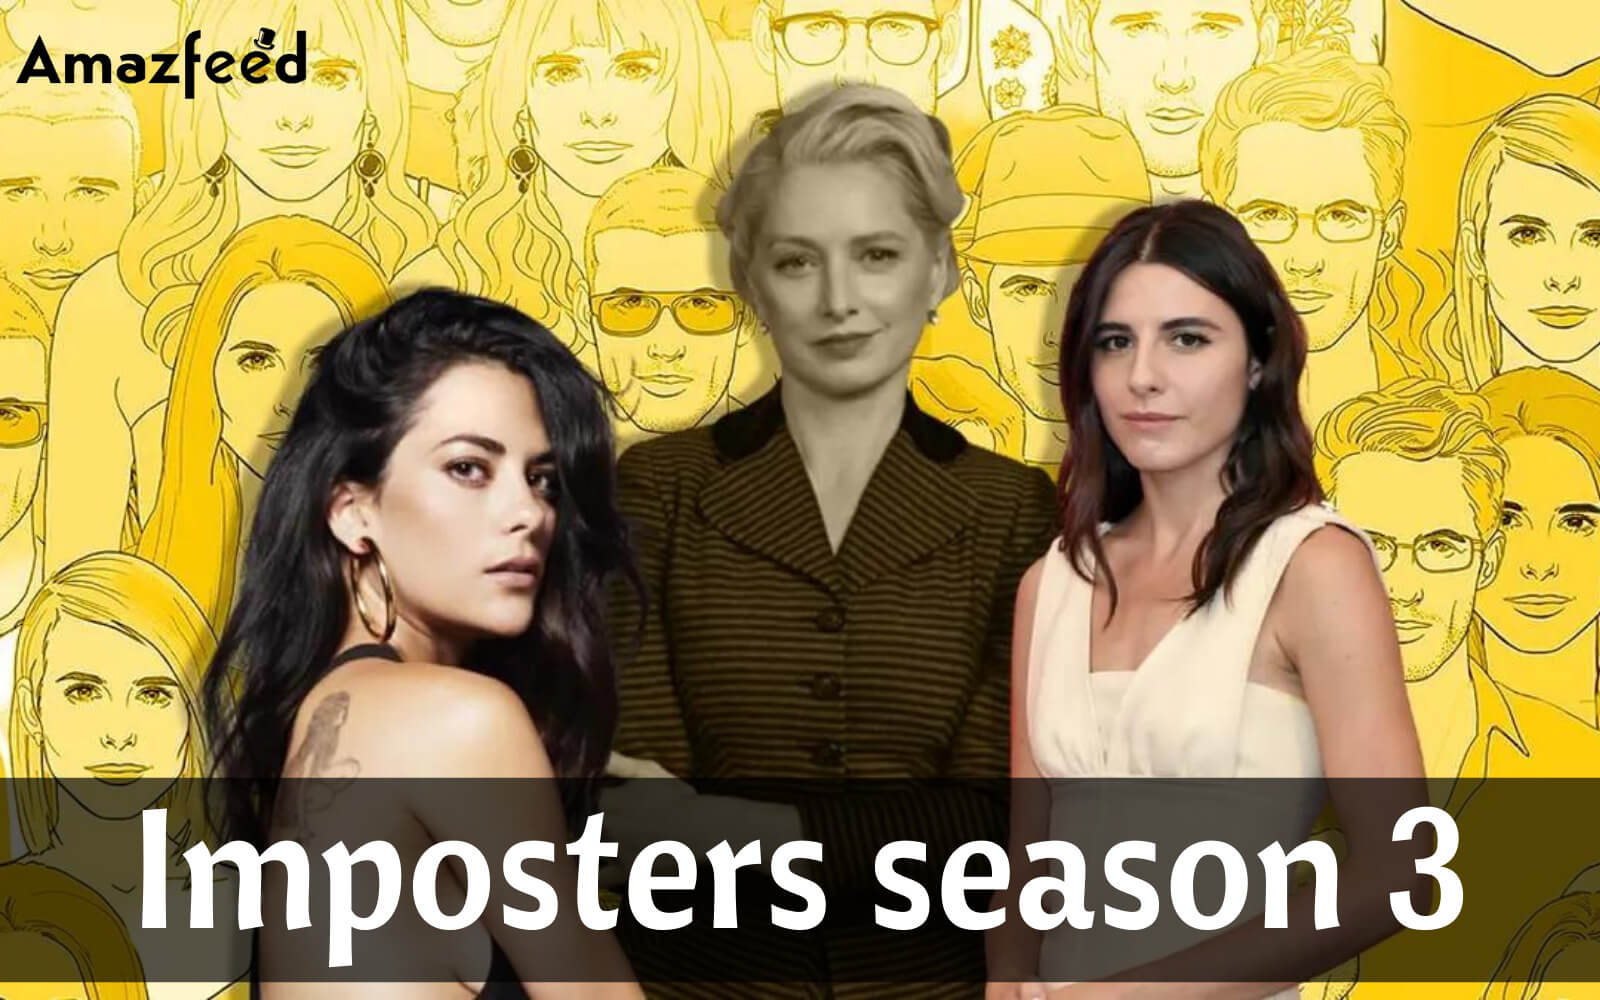 When is Imposters season 3 coming to Netflix